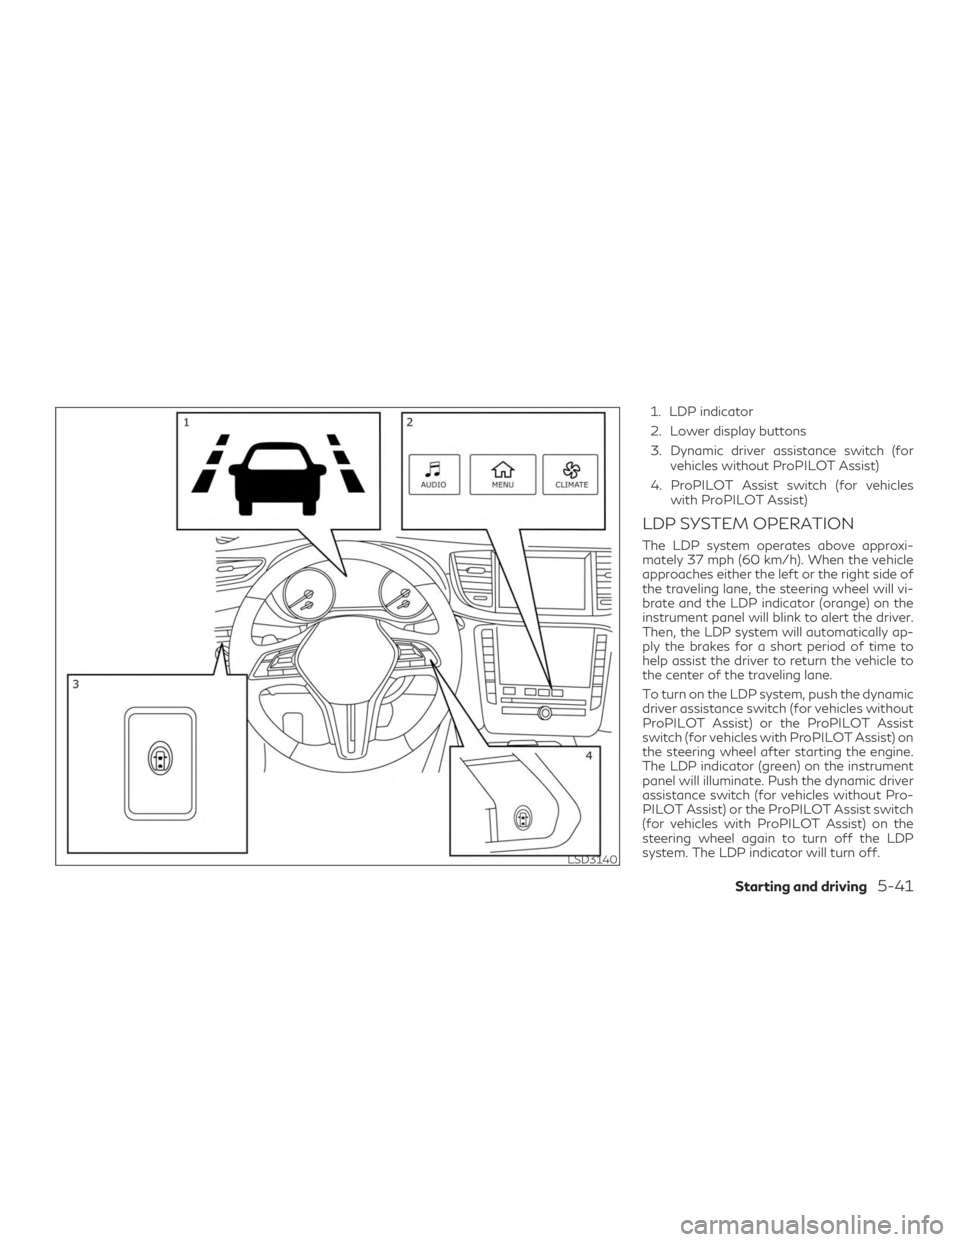 INFINITI QX50 2020  Owners Manual 1. LDP indicator
2. Lower display buttons
3. Dynamic driver assistance switch (forvehicles without ProPILOT Assist)
4. ProPILOT Assist switch (for vehicles with ProPILOT Assist)
LDP SYSTEM OPERATION
T